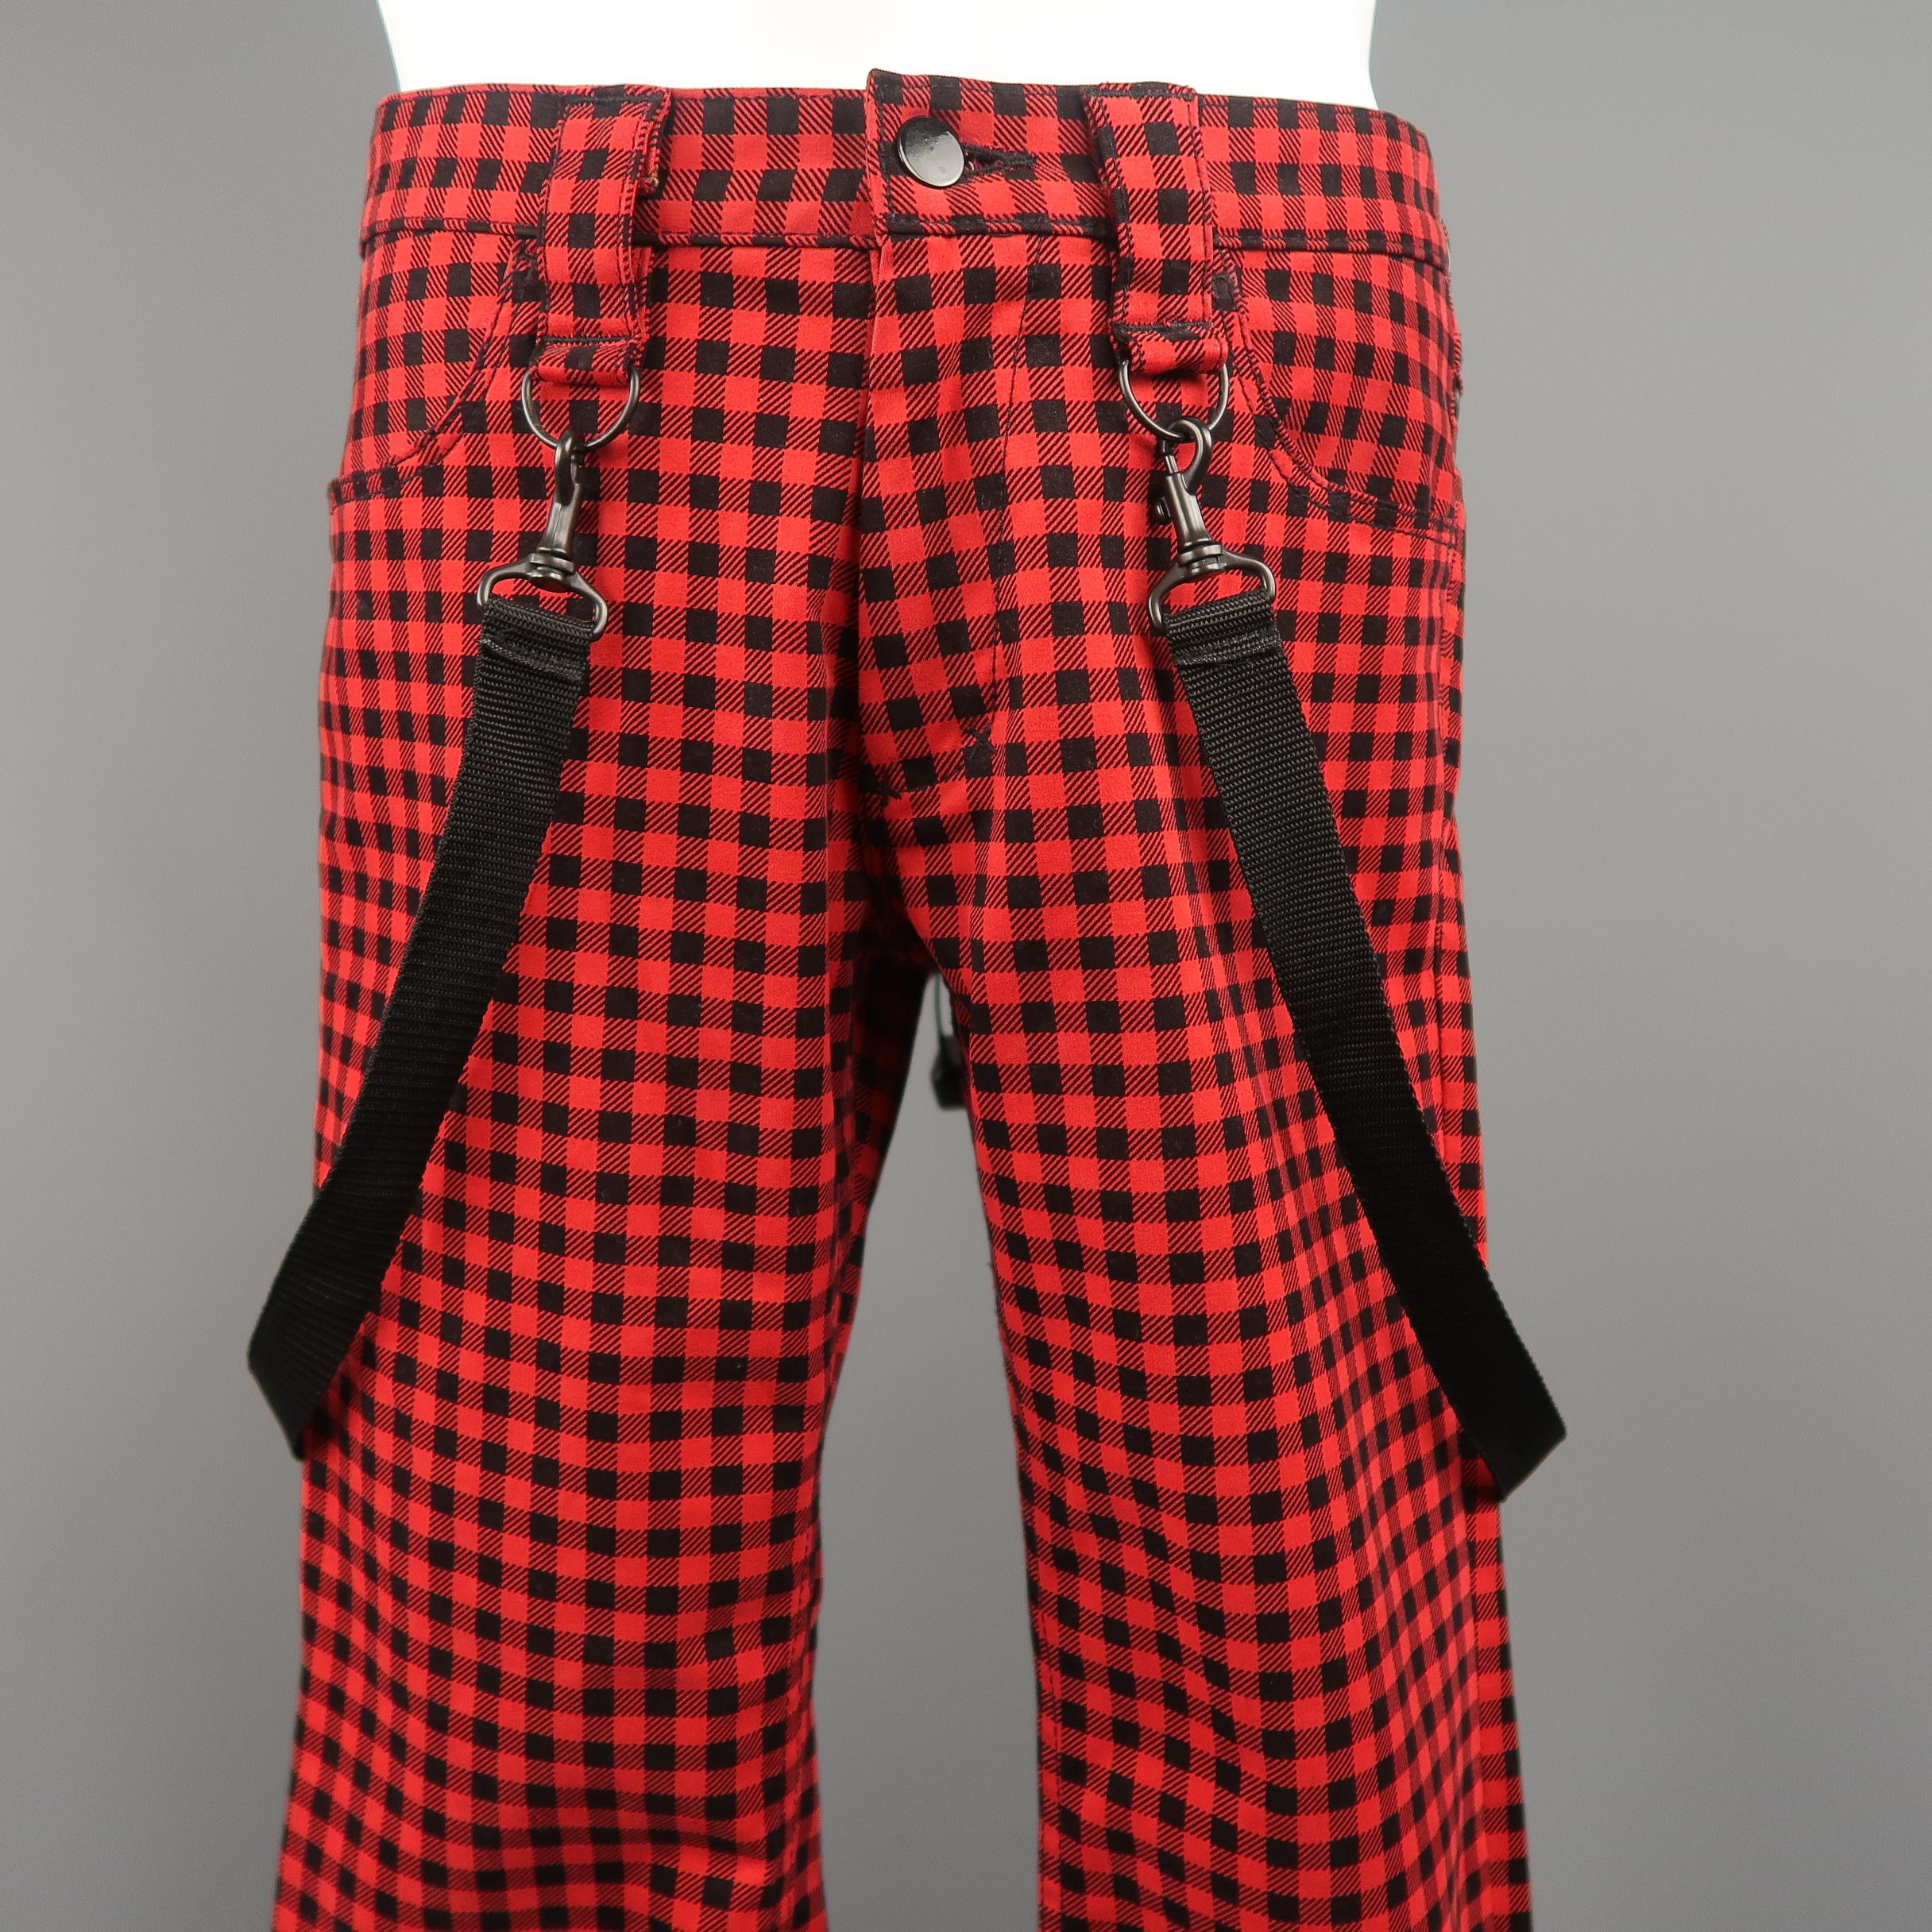 NUMBER (N)INE jeans come in red and black gingham plaid stretch cotton with black webbing detachable bondage strap. Made in Japan. Excellent Pre-Owned Condition.
Marked: JP 2
 
Measurements:
Waist: 32 in.
Rise: 8.5 in.
Inseam: 34 in.